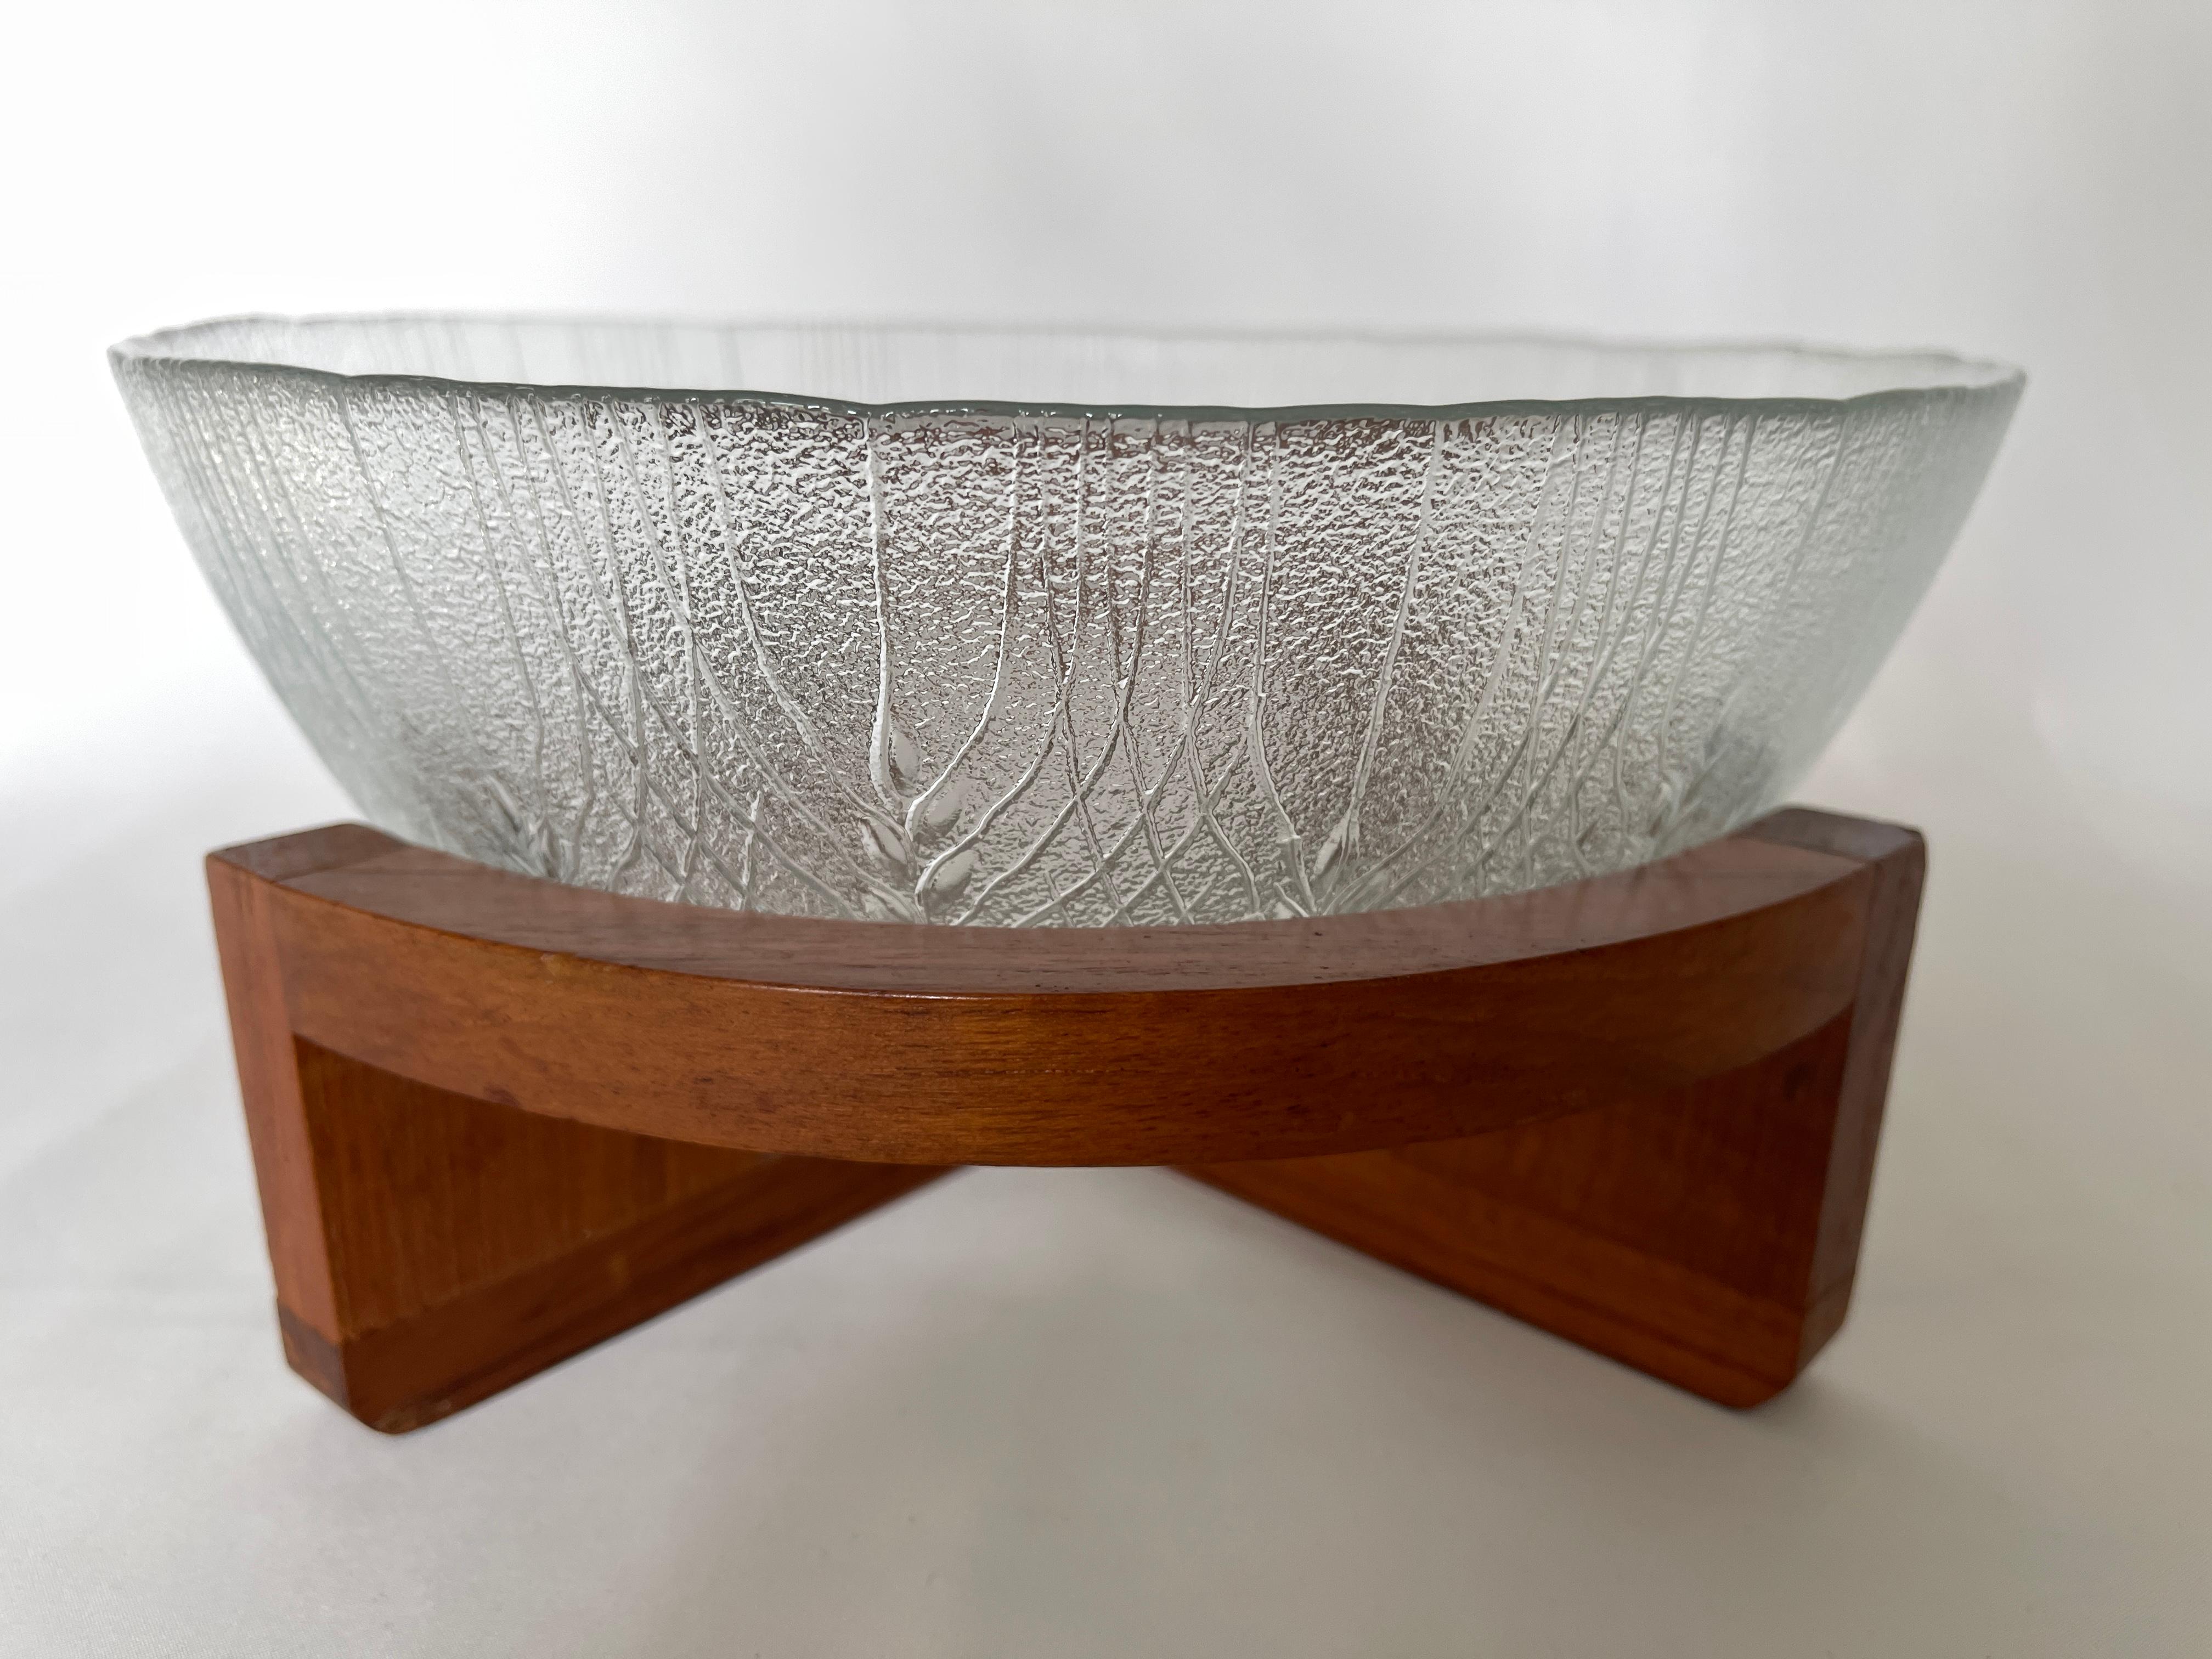 1960's Danish Modern opaque pressed glass bowl with curved teak wood stand. Glass bowl measures 10